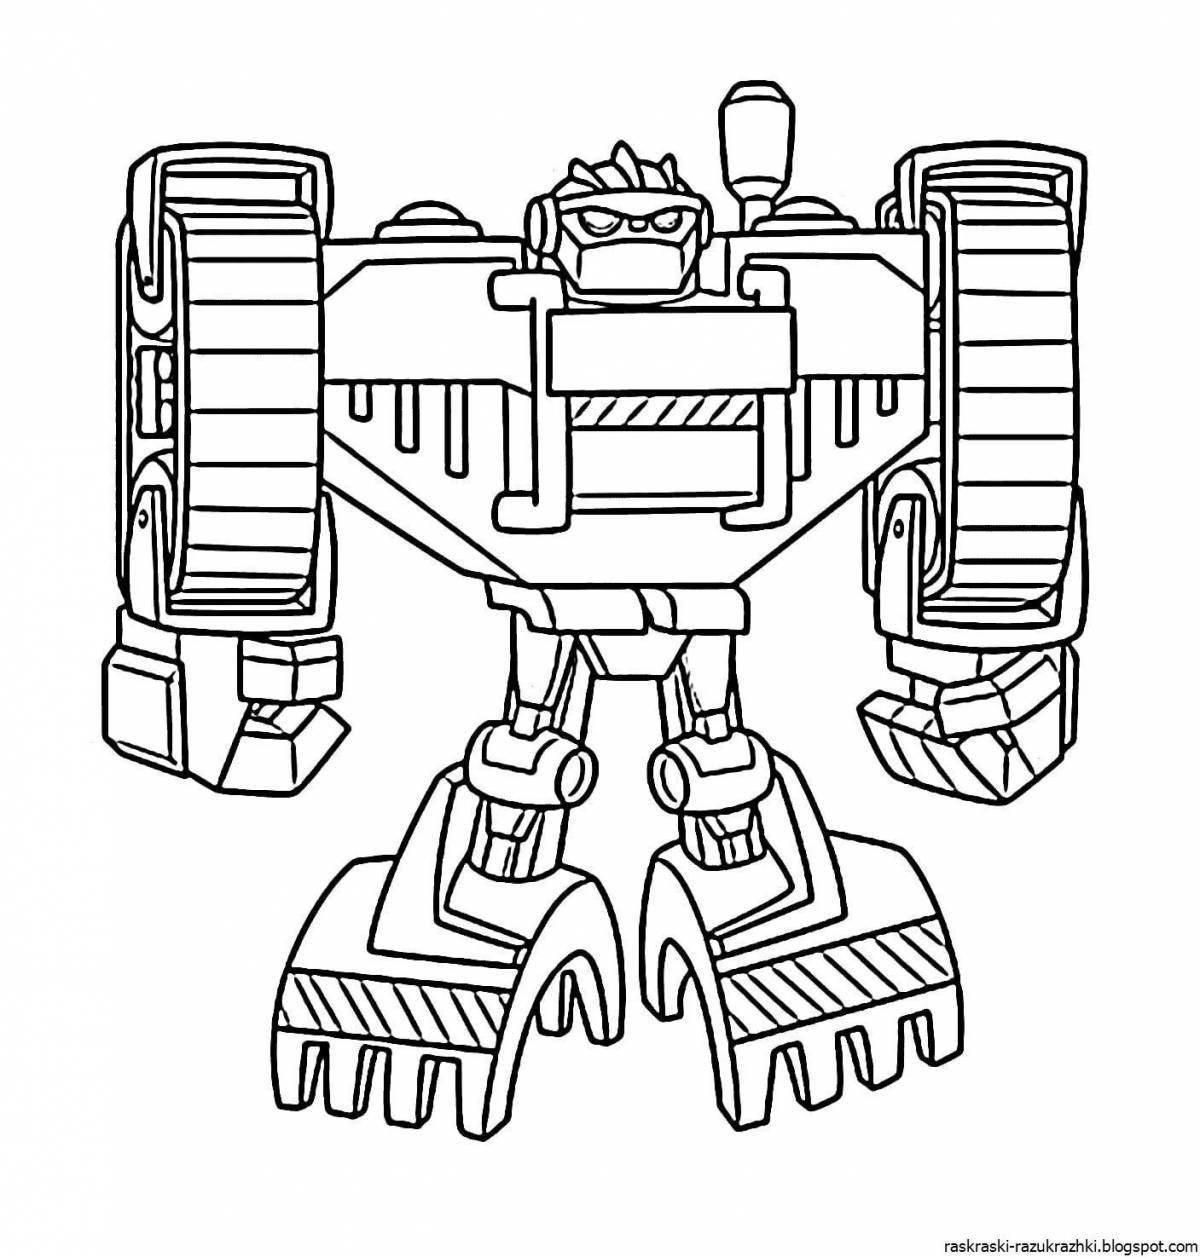 Adorable robot coloring pages for 5-7 year olds